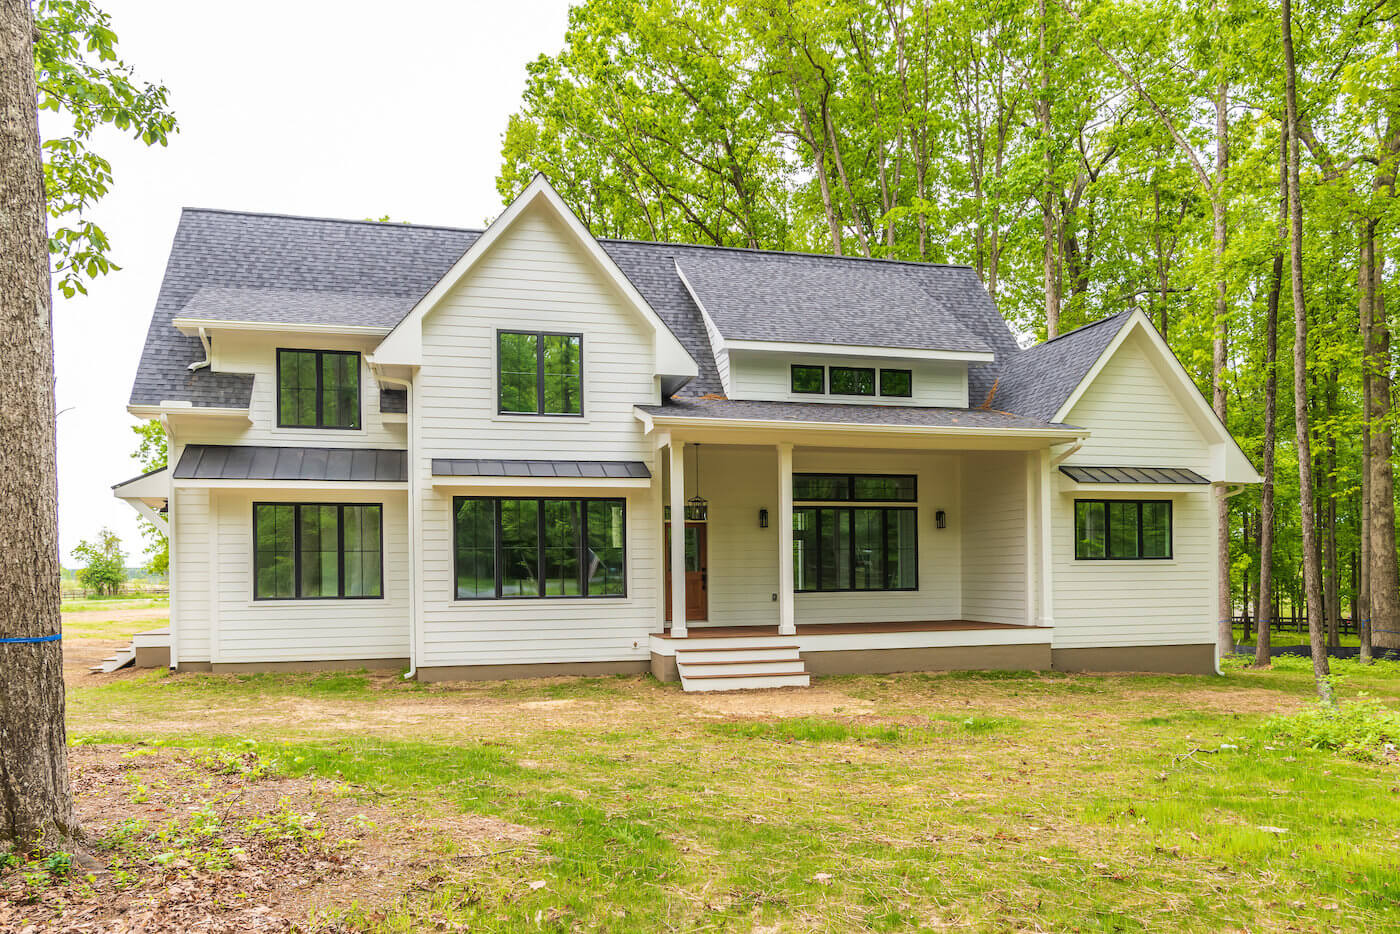 Listing - Round Hill, Virginia - New Construction